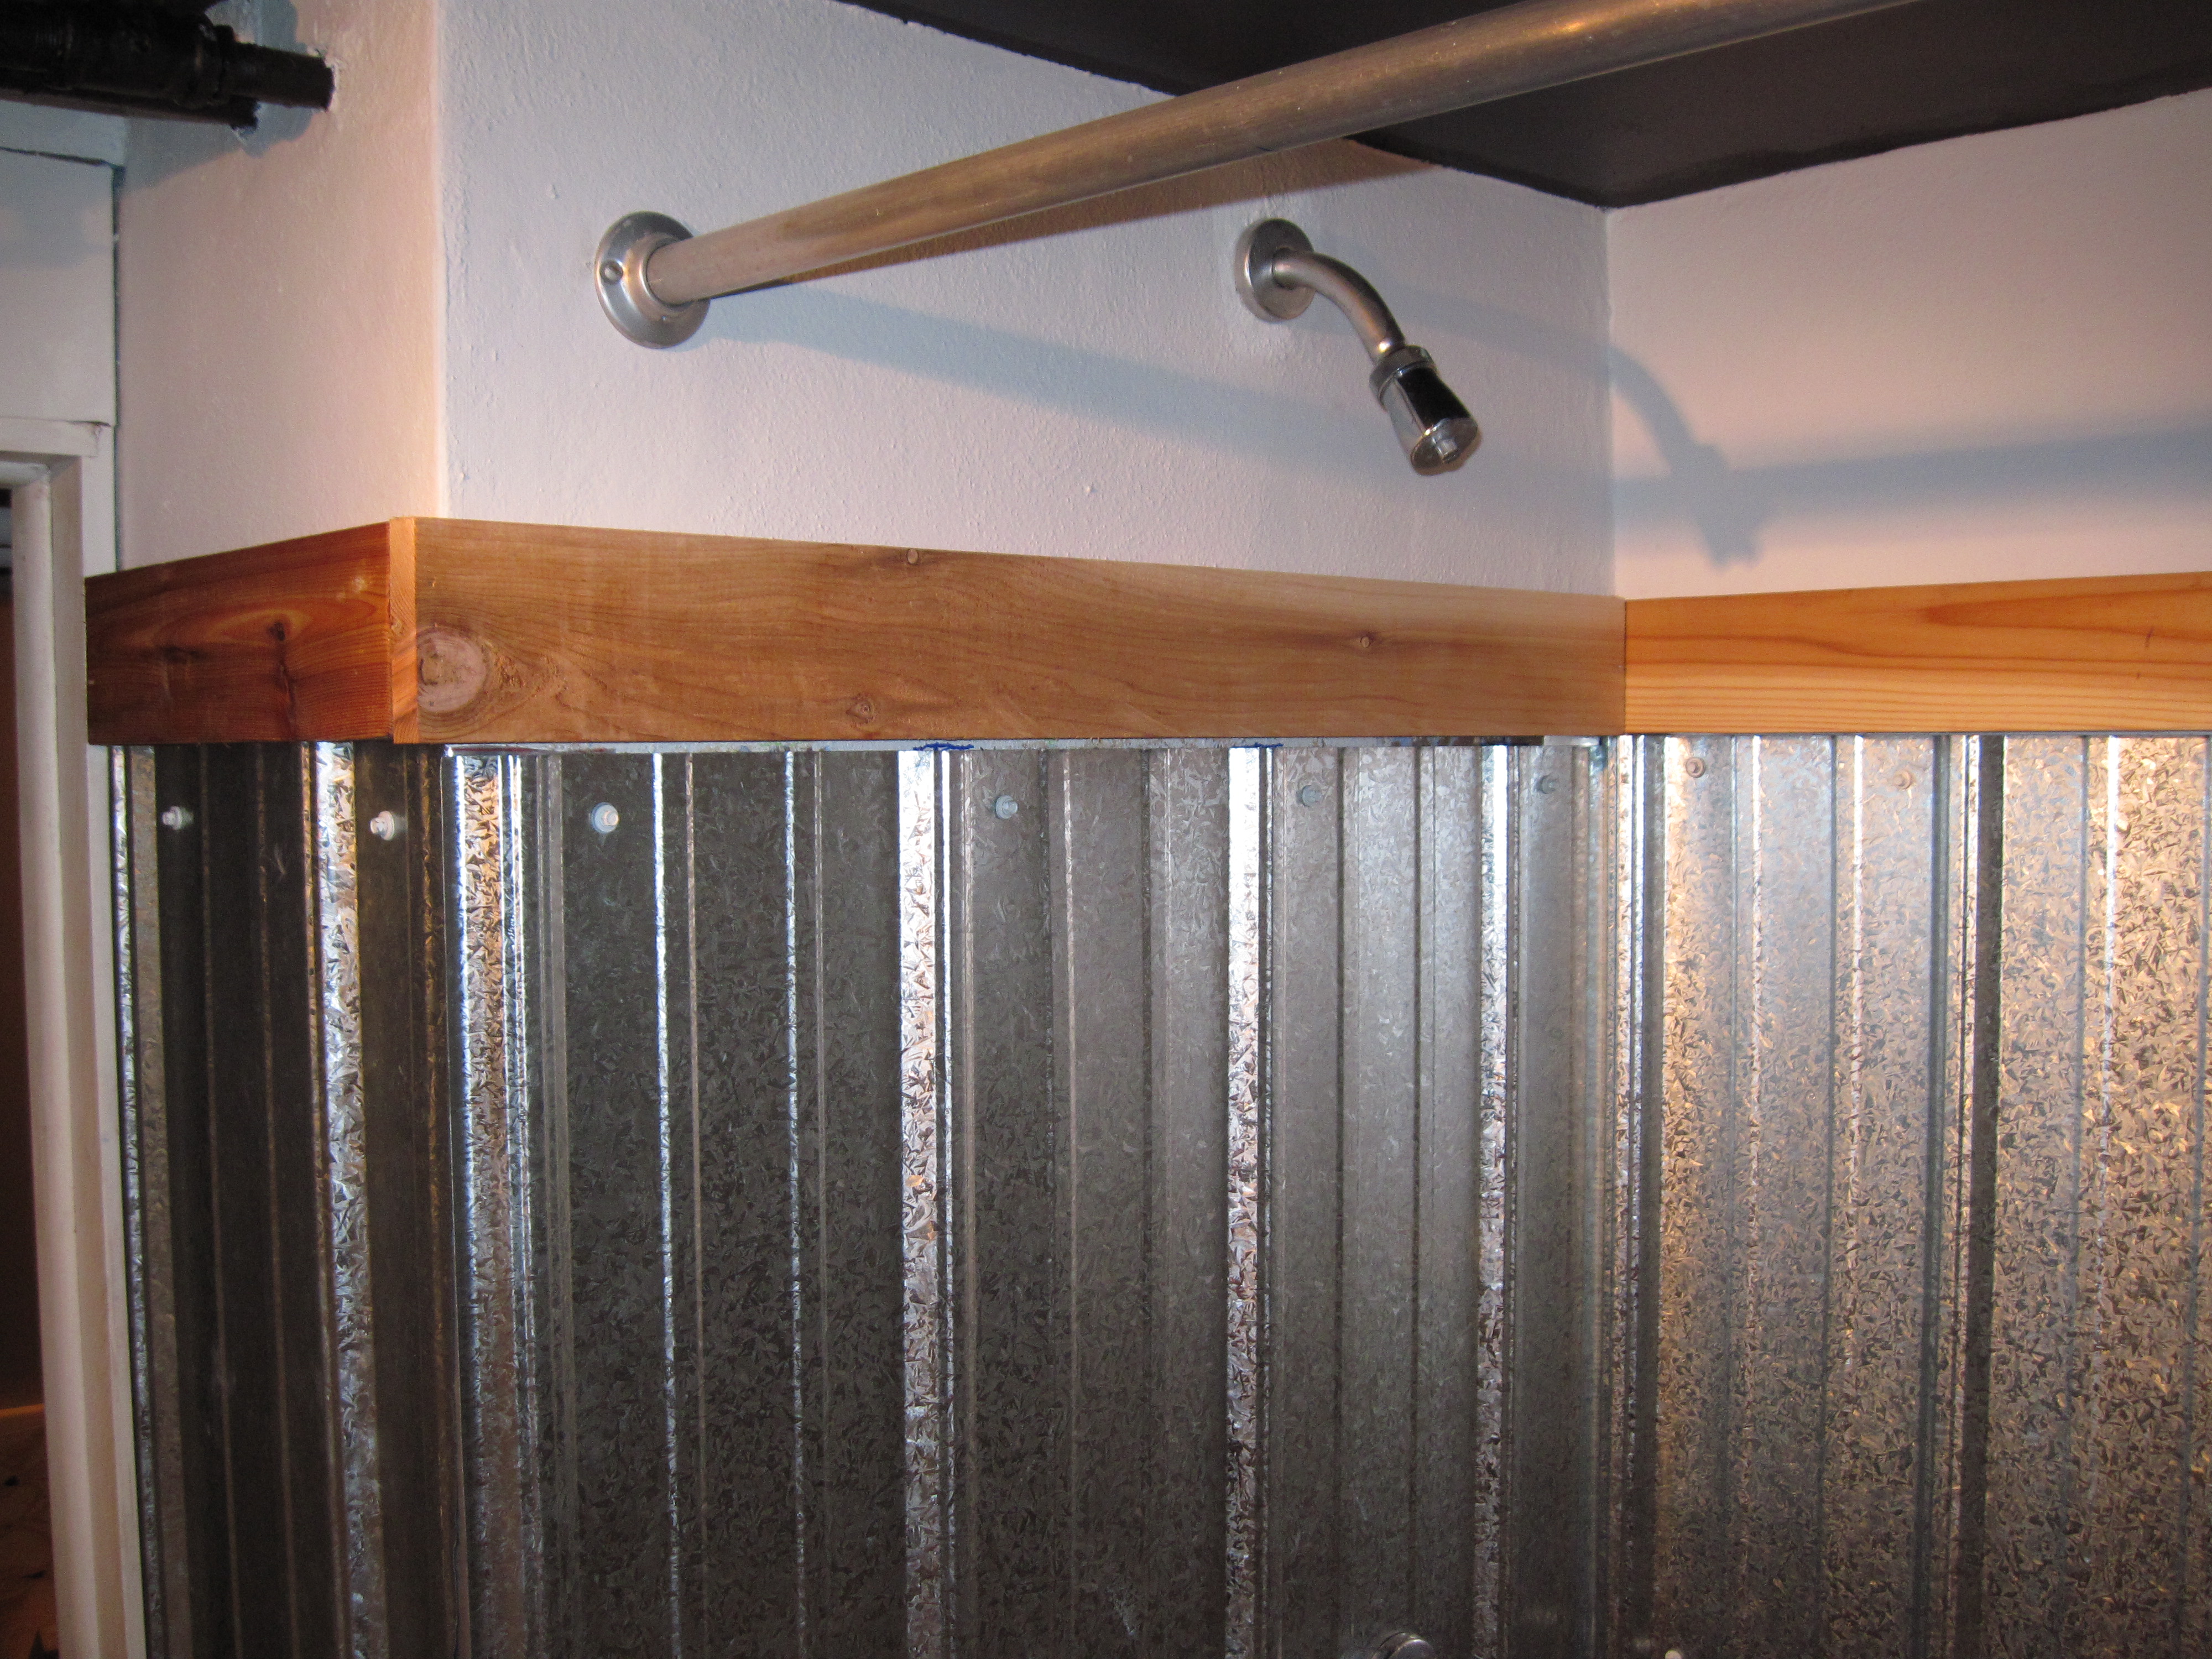 Galvanized Shower Surround: A Complete How-To | Bungalow Bungahigh